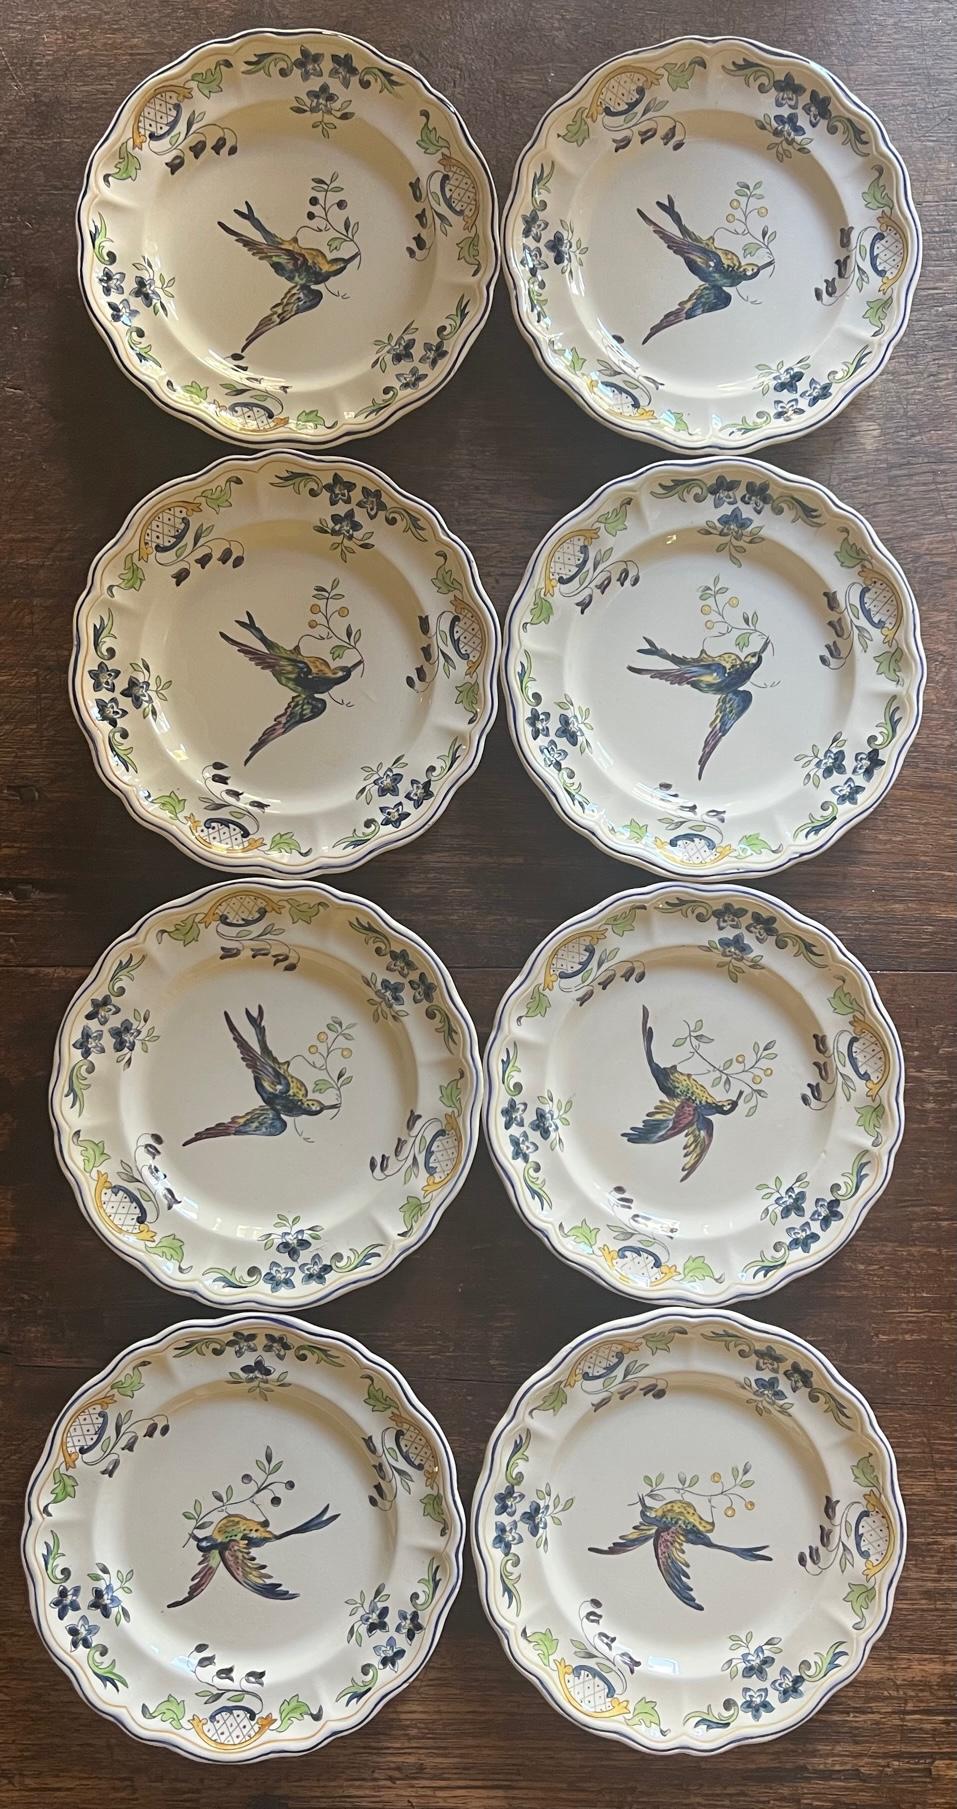 French Faience Plates in Clery Pattern by Longchamp, C. 1930's- Set of 8 For Sale 5